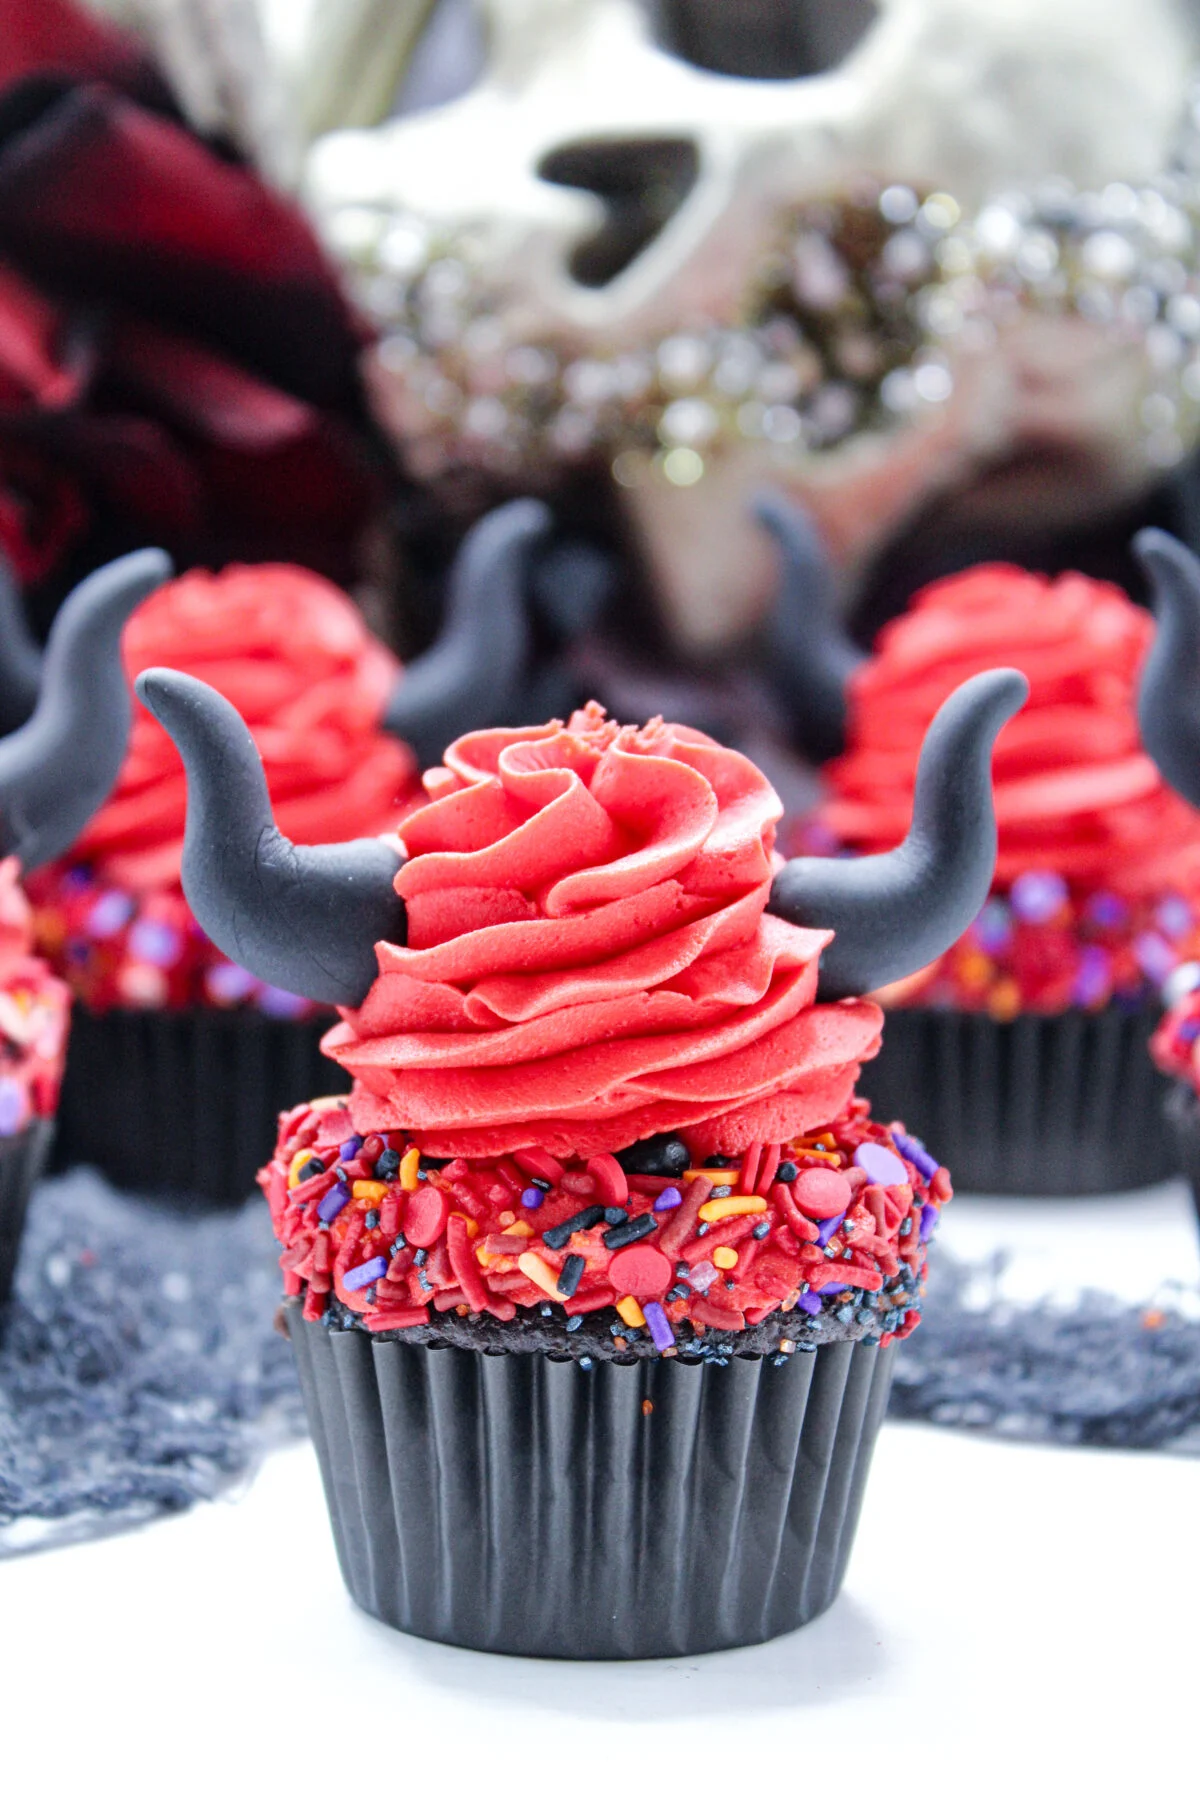 Get into the spirit of Halloween with this wickedly delicious recipe! Spooky and sweet, these devil cupakes will be a hit for Halloween.